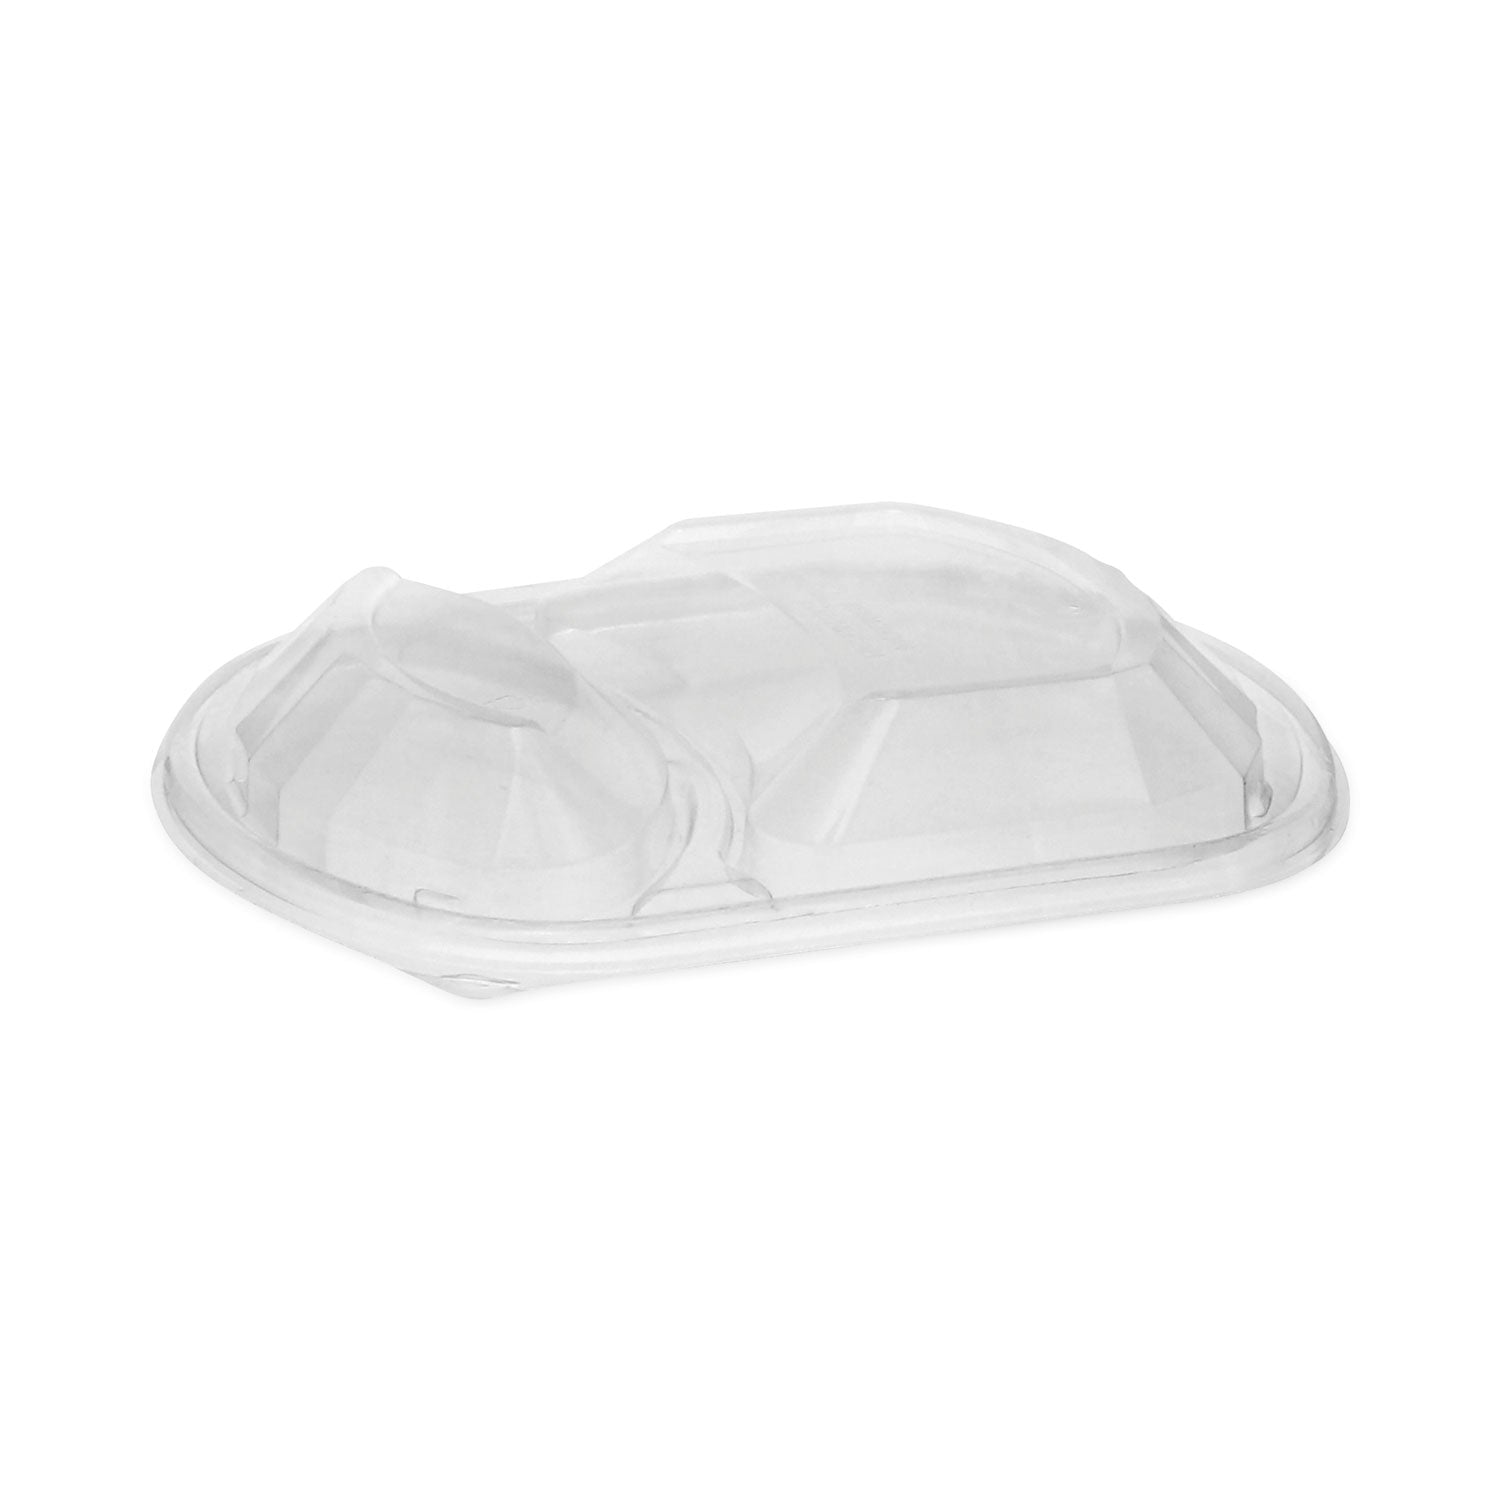 clearview-mealmaster-lid-with-fog-gard-coating-large-2-compartment-dome-lid-938-x-8-x-125-clear-plastic-252-carton_pctycn8467h00d0 - 1